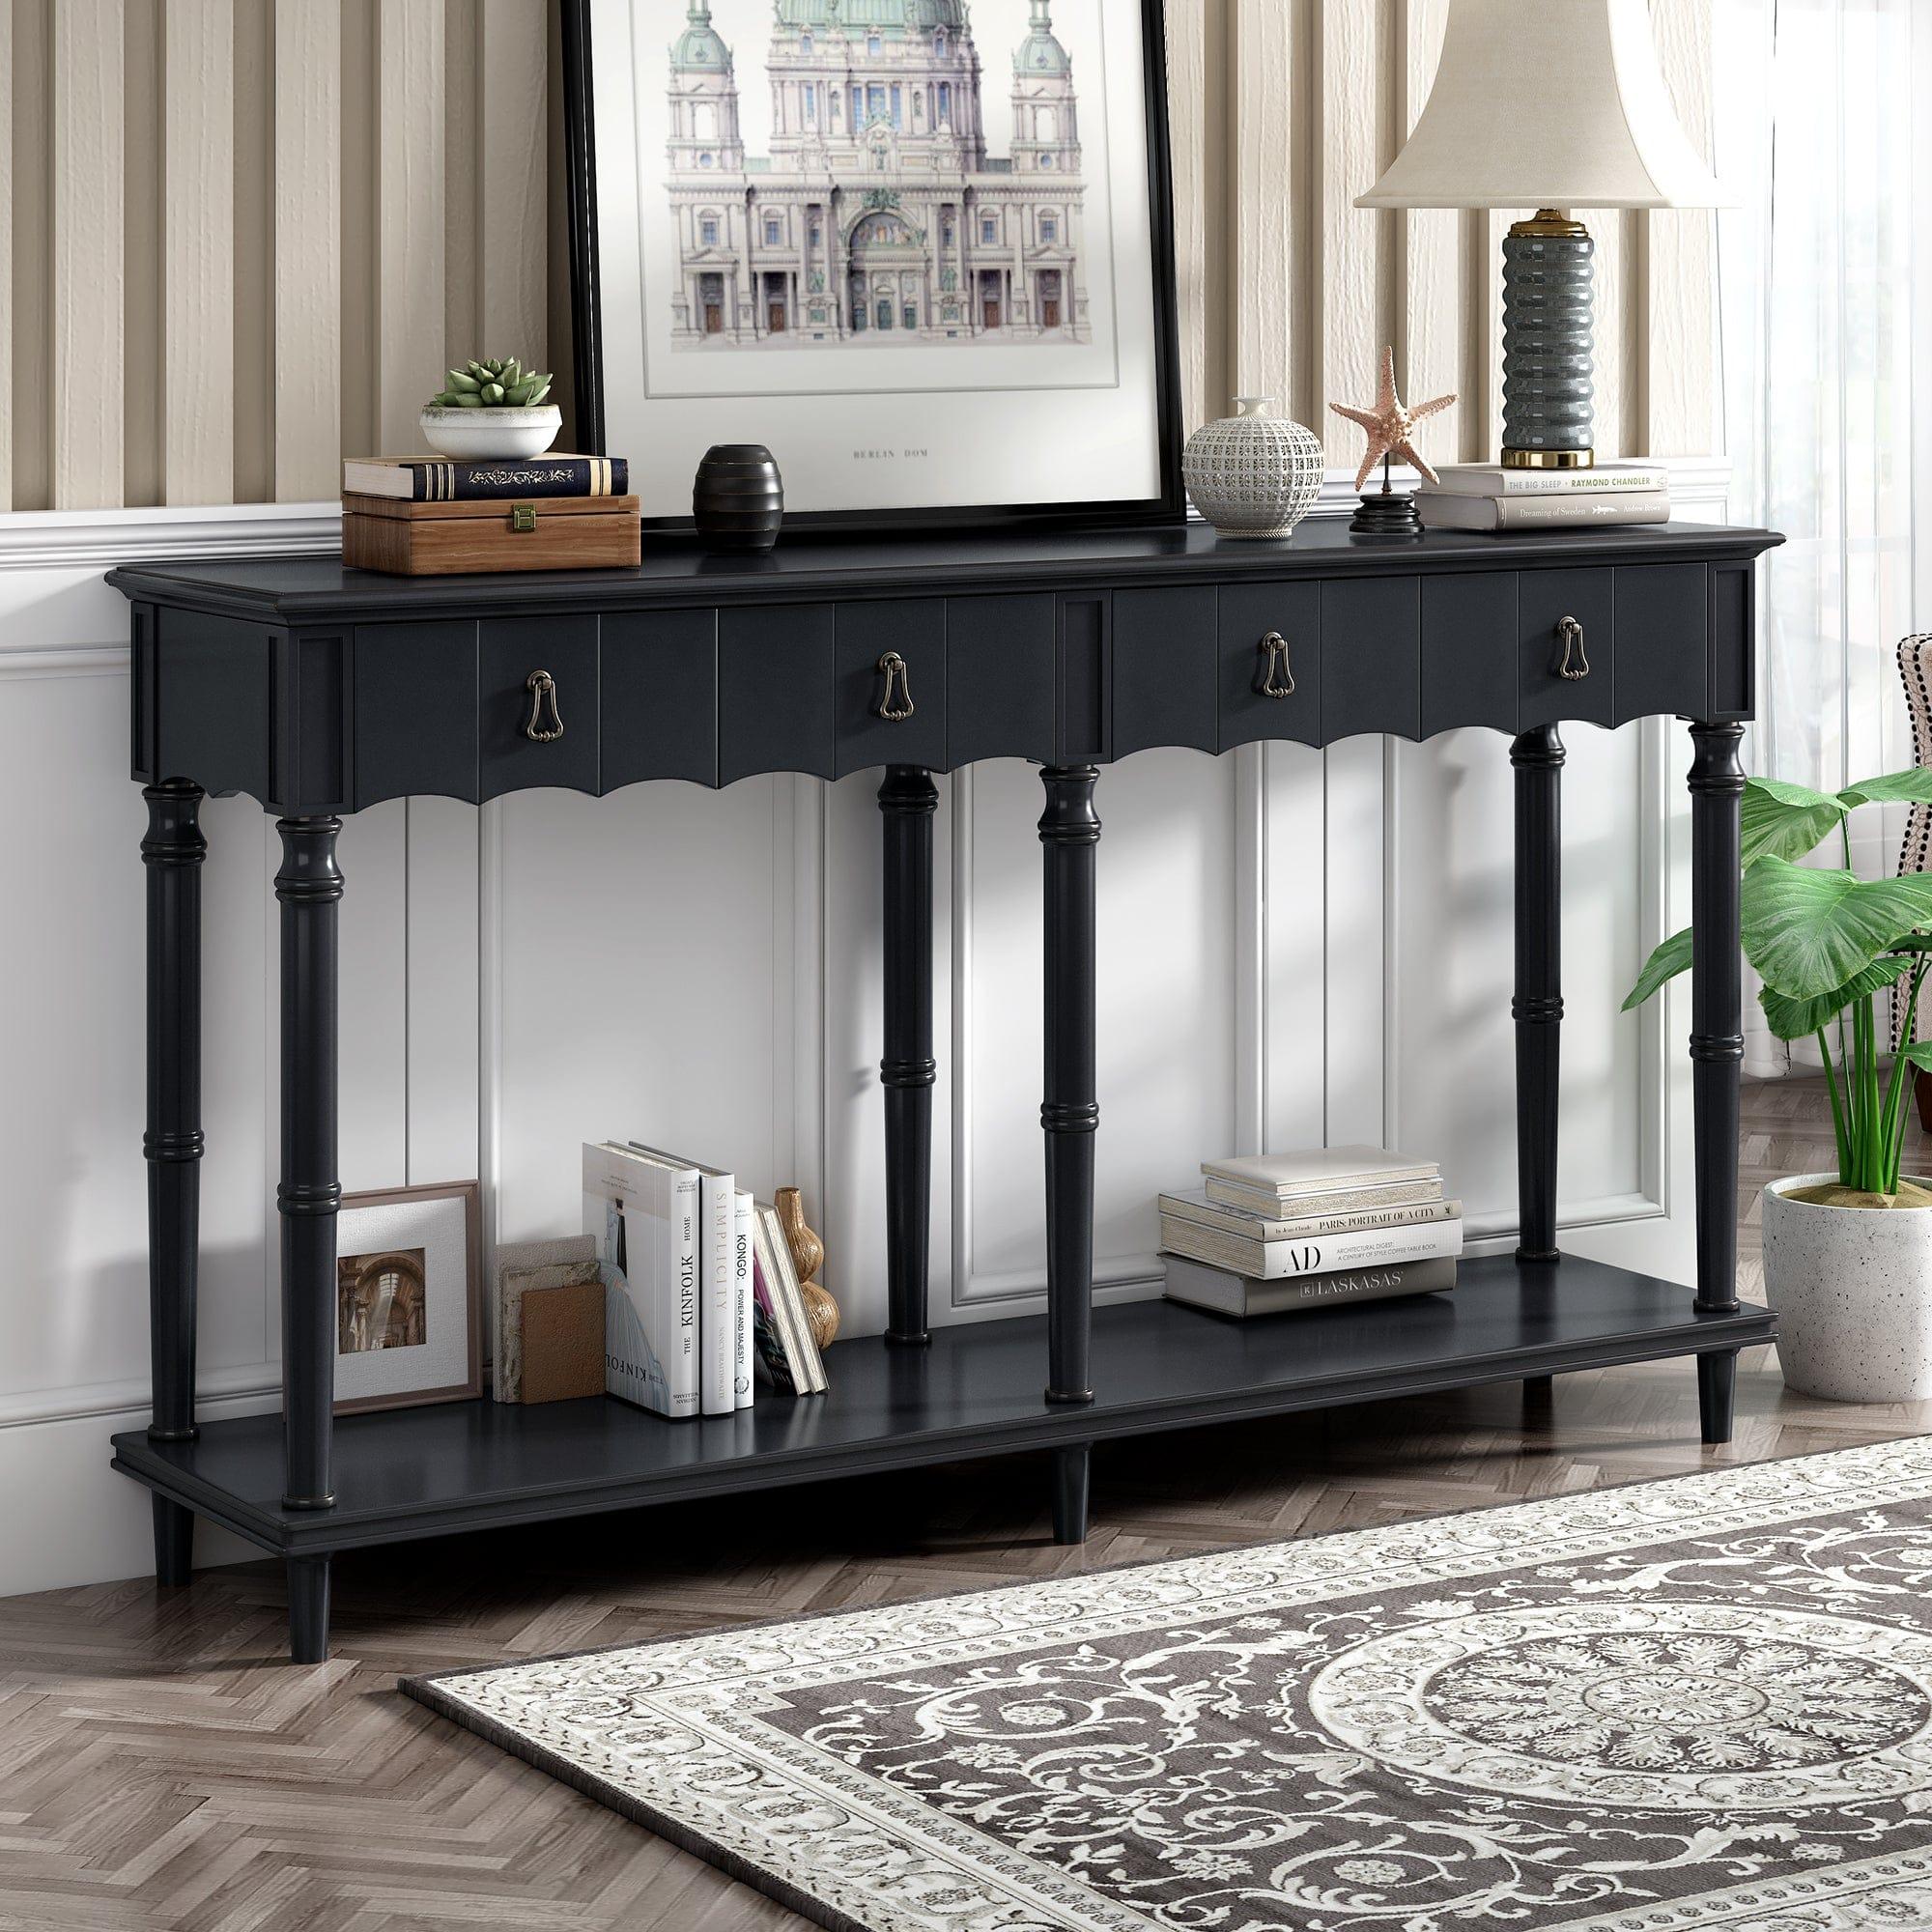 Shop 【Not allowed to sell to Wayfair】【请不要上架至Wayfair平台】 U_STYLE  Country Console Table for Hallway Living Room Bedroom with 4 Front Facing Storage Drawers and 1 Shelf Mademoiselle Home Decor